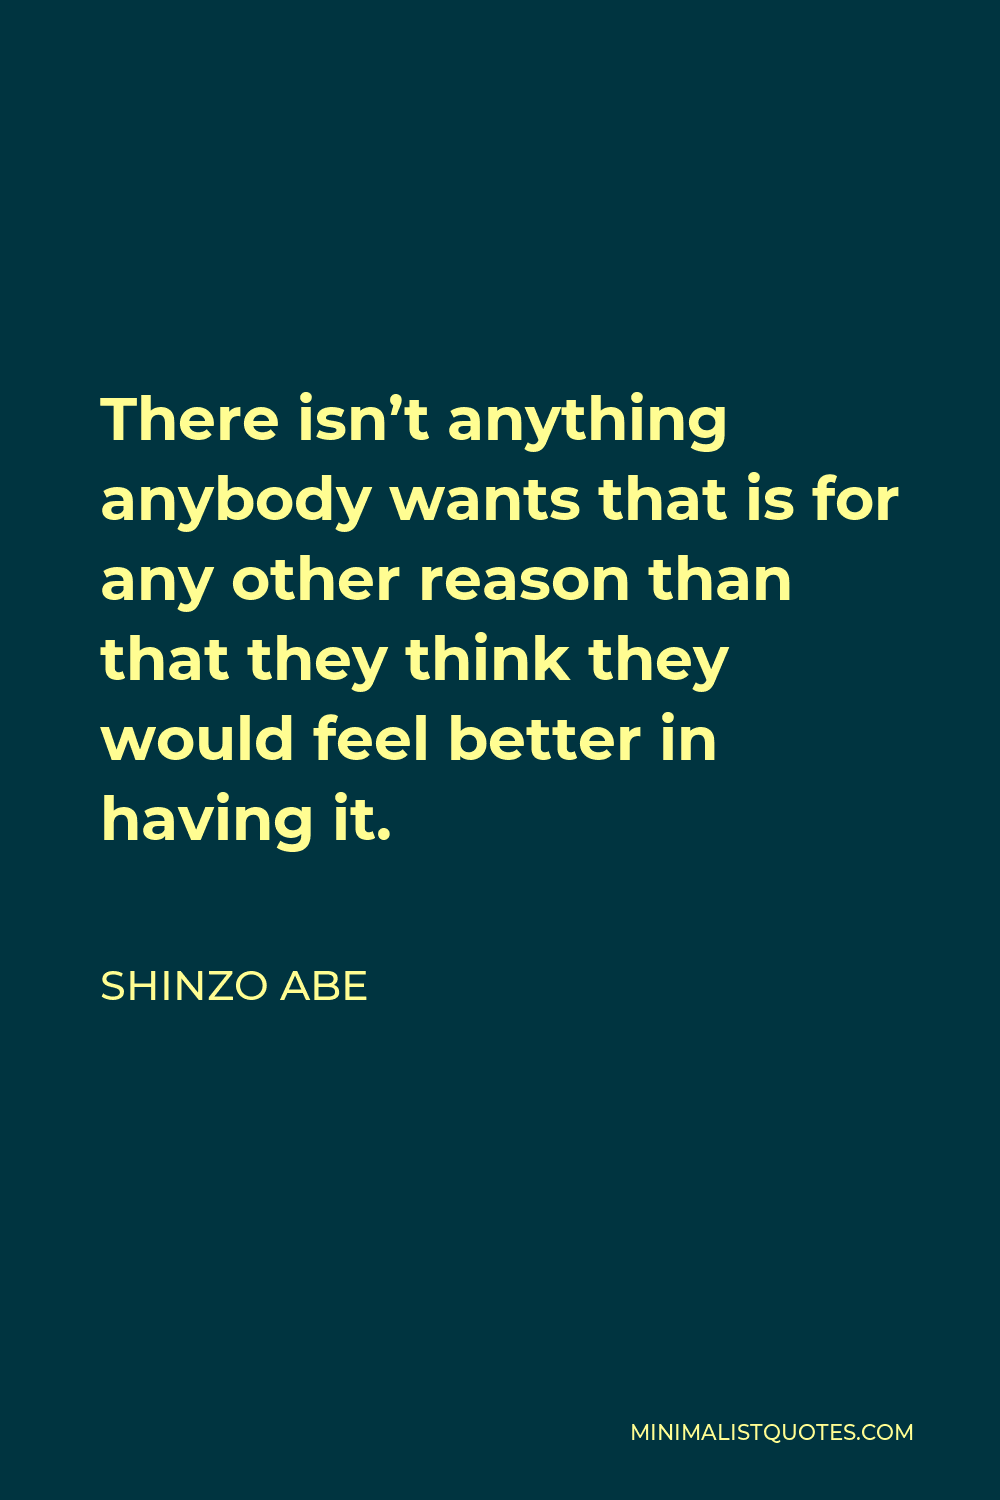 Shinzo Abe Quote - There isn’t anything anybody wants that is for any other reason than that they think they would feel better in having it.